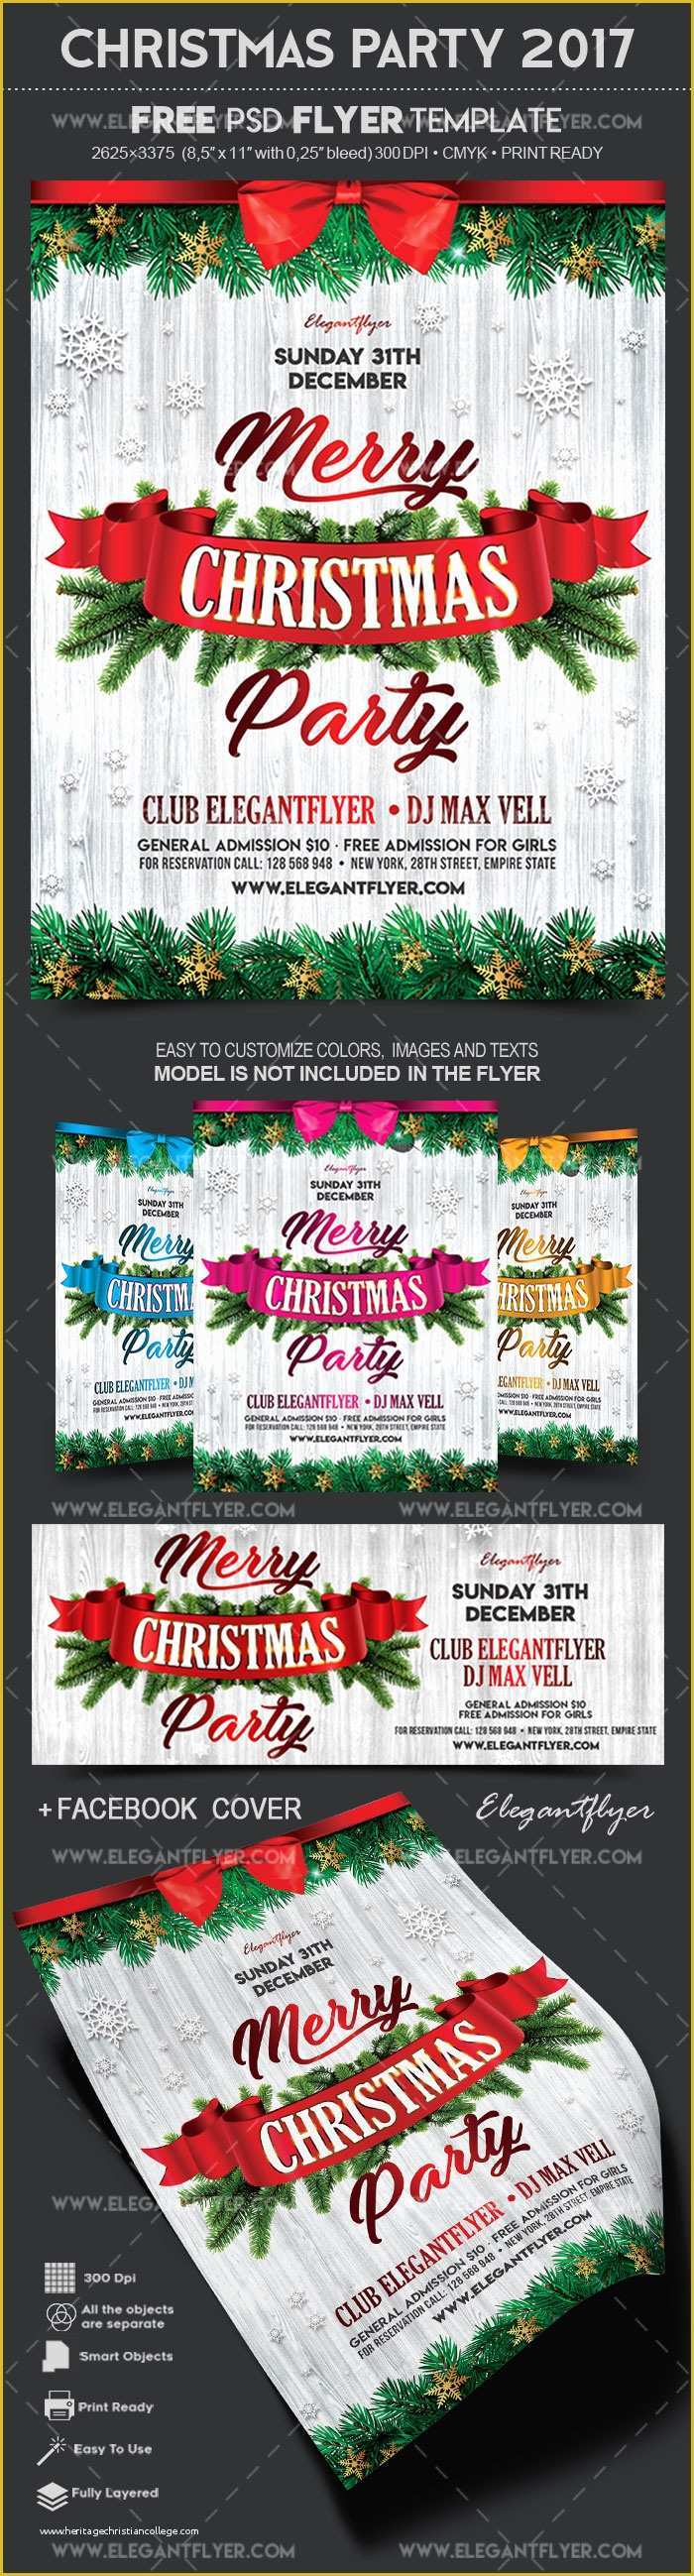 Christmas Party Flyer Template Free Psd Of Christmas Party 2017 – Free Flyer Psd Template – by